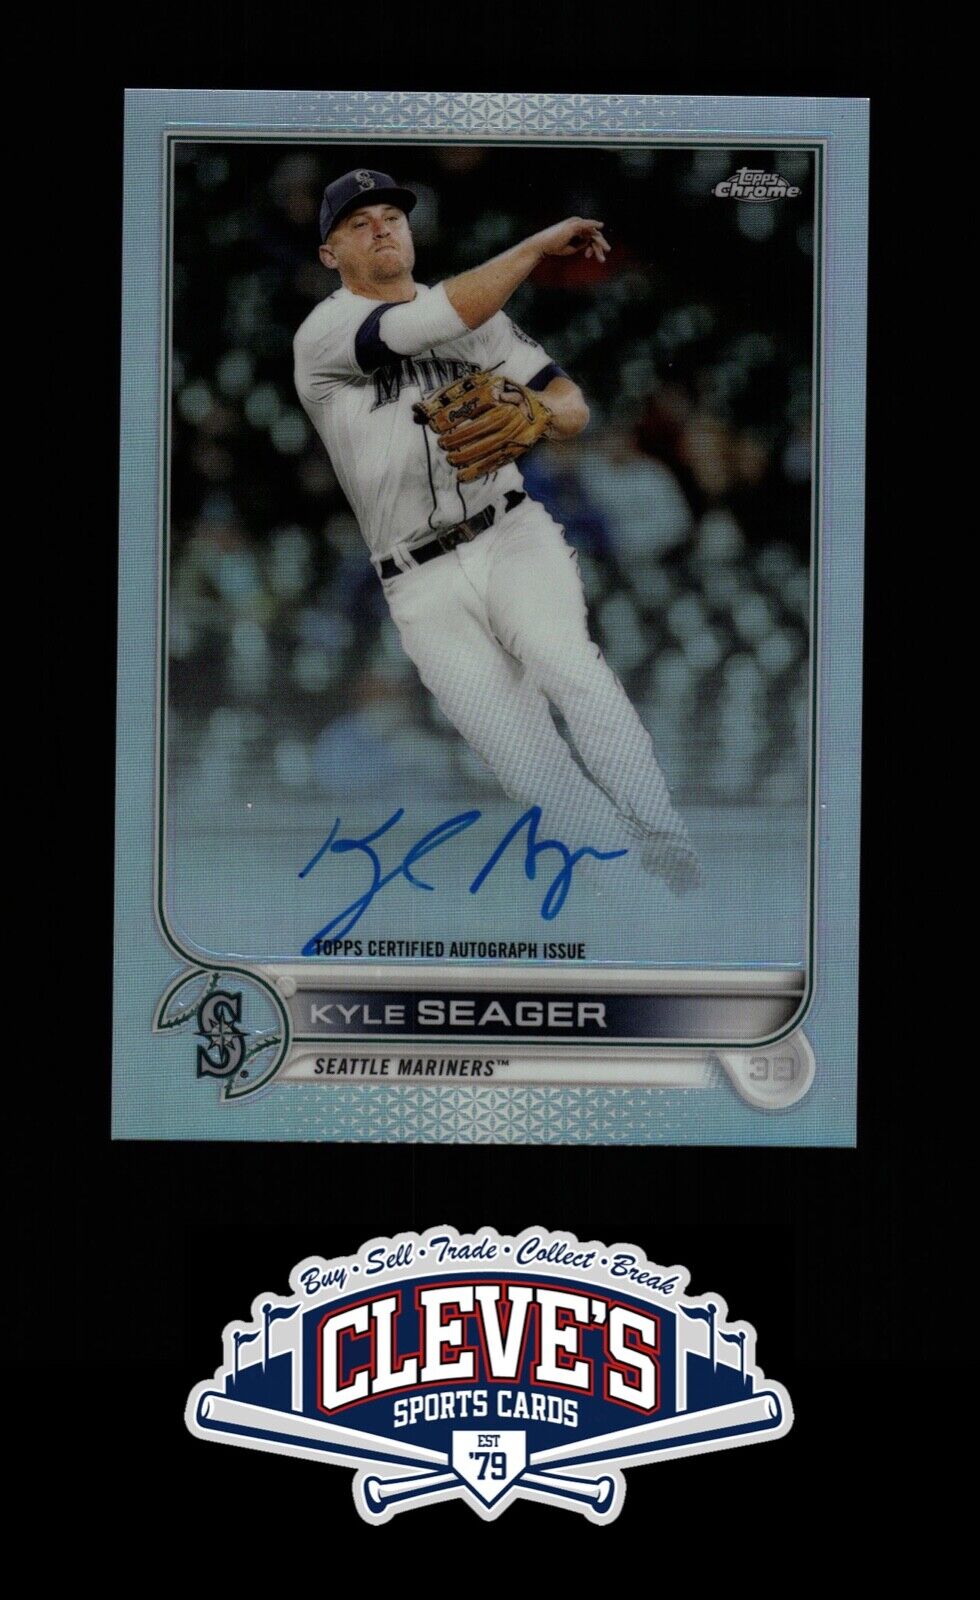 2022 TOPPS CHROME KYLE SEAGER AUTO 091/499 REFRACTOR SEATTLE MARINERS